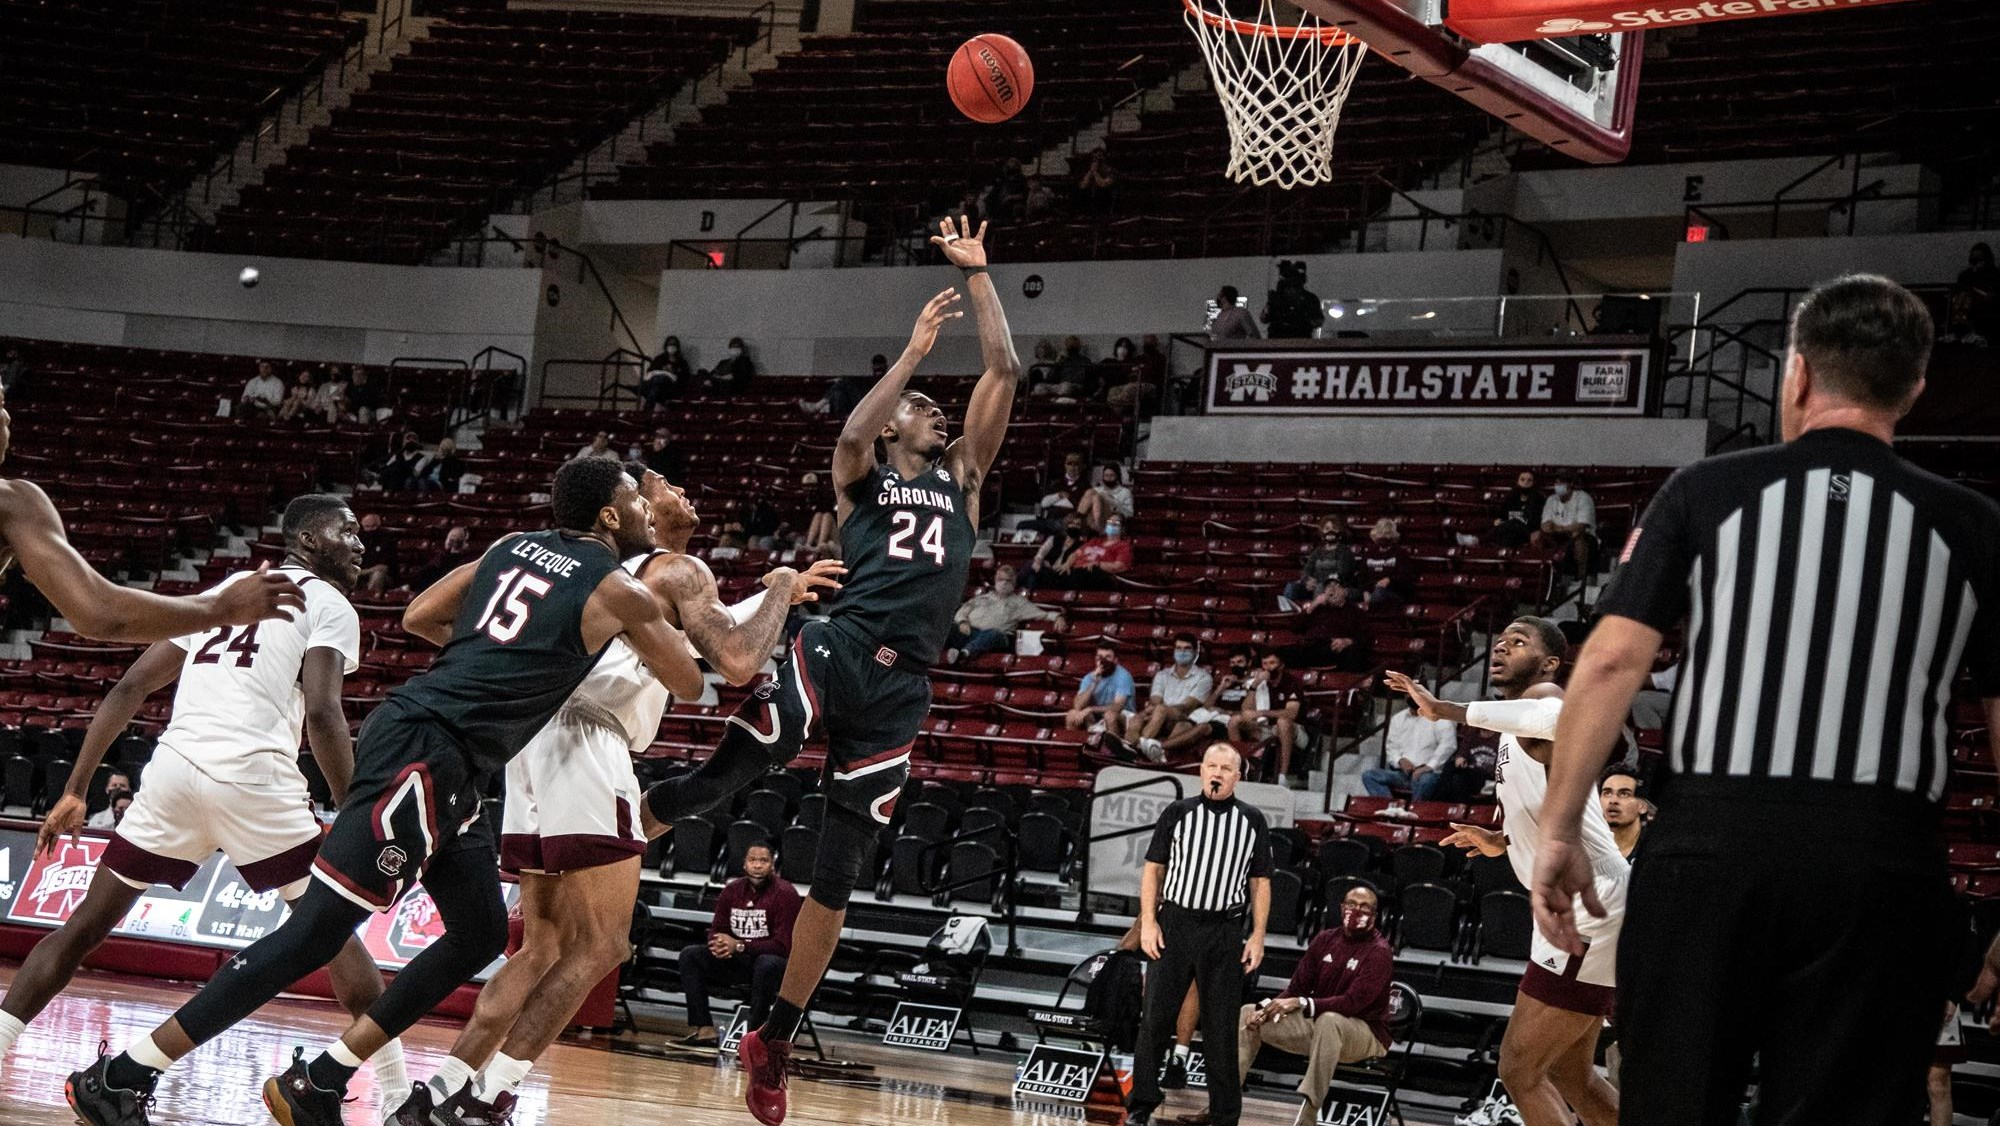 Mississippi St. jumps out early, beats South Carolina 69-48